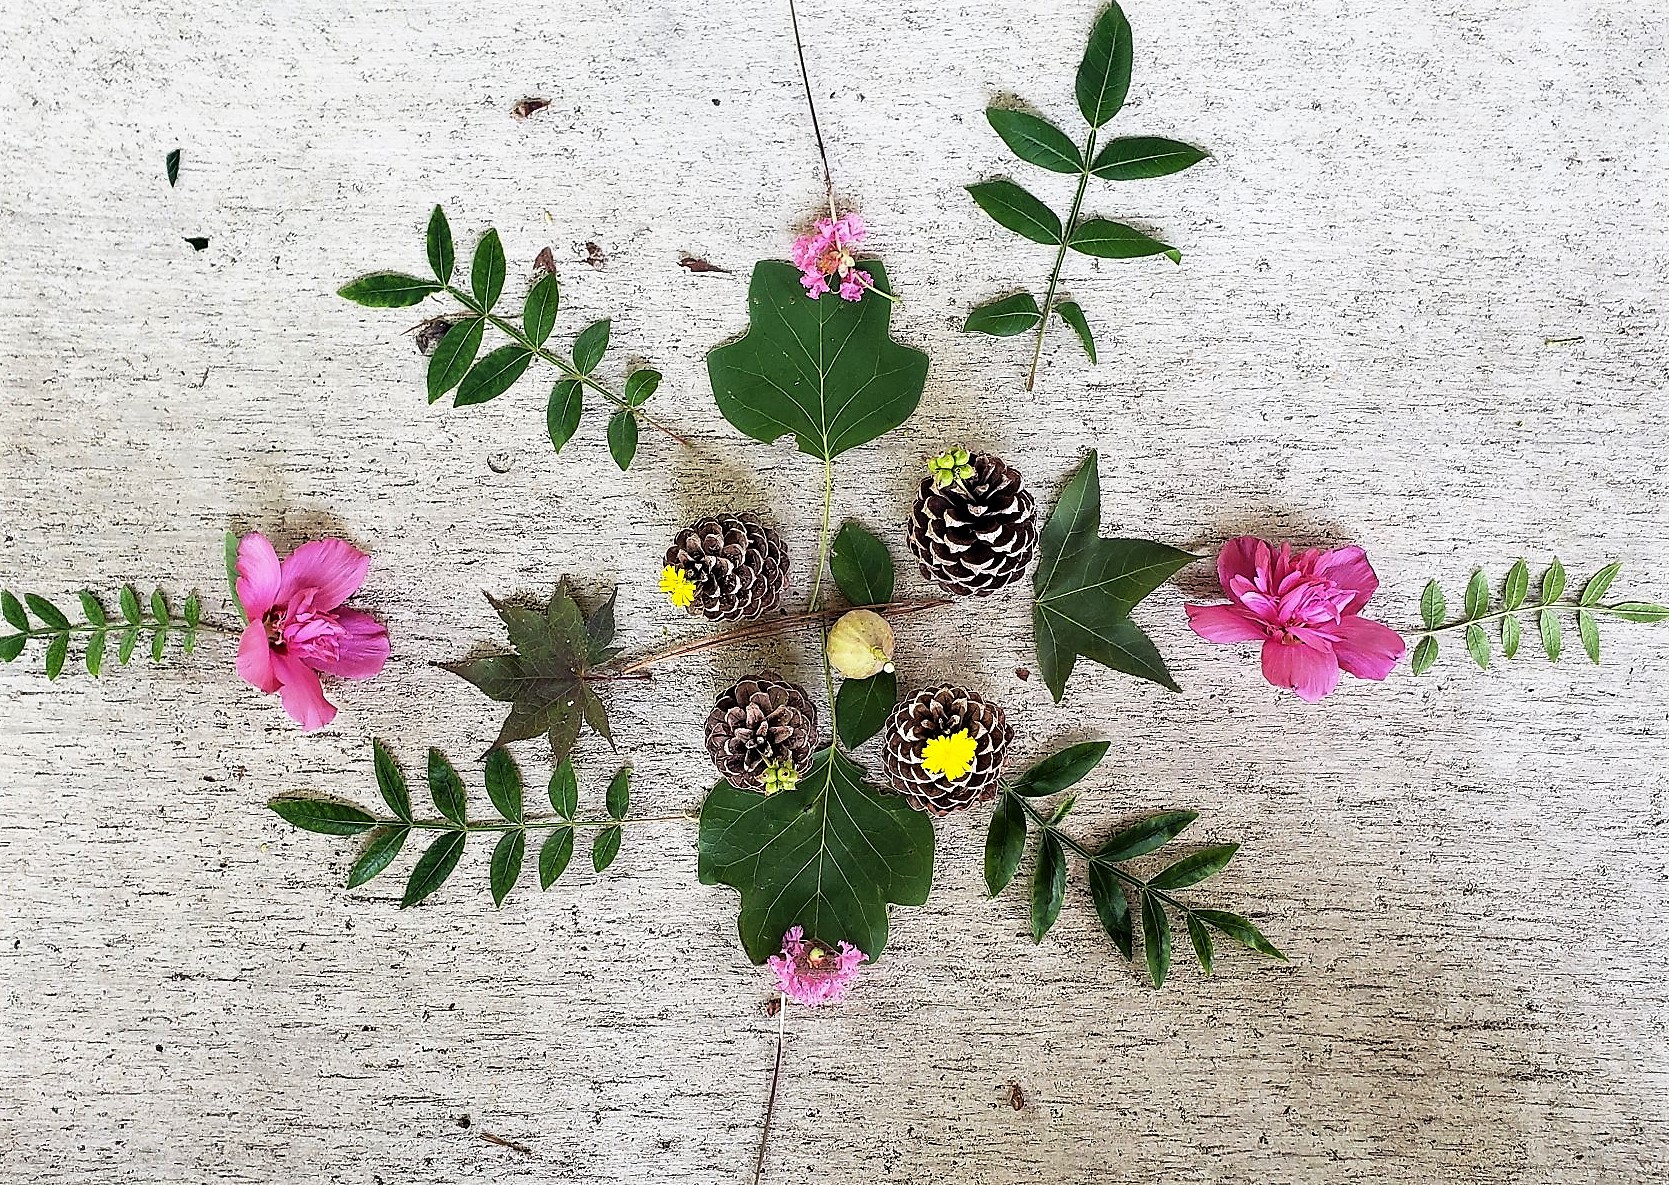 plant mandala with green leaves, pink flowers and seeds